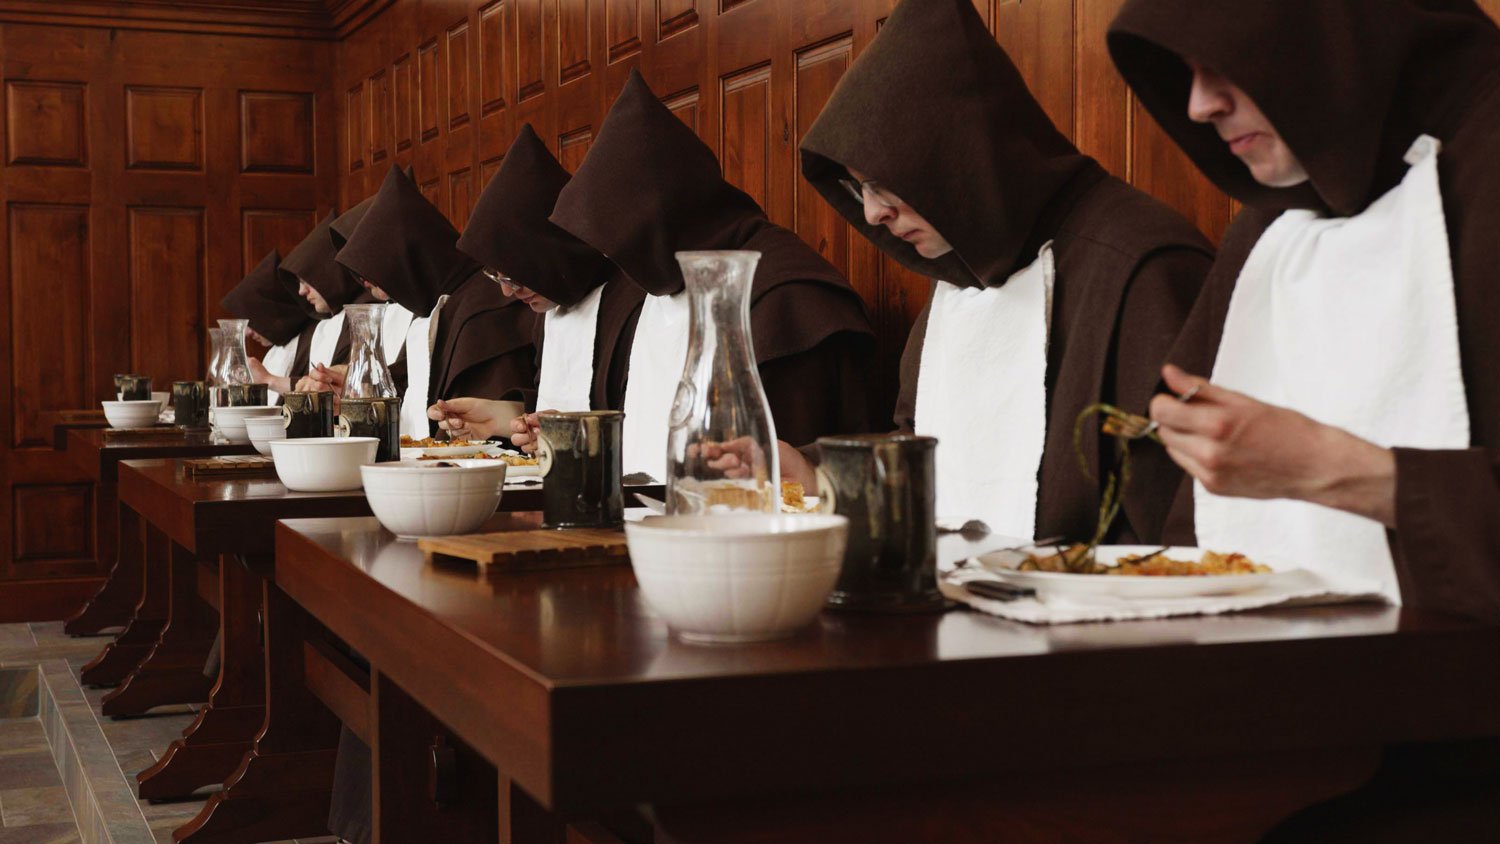 Monks eating in the refectory.